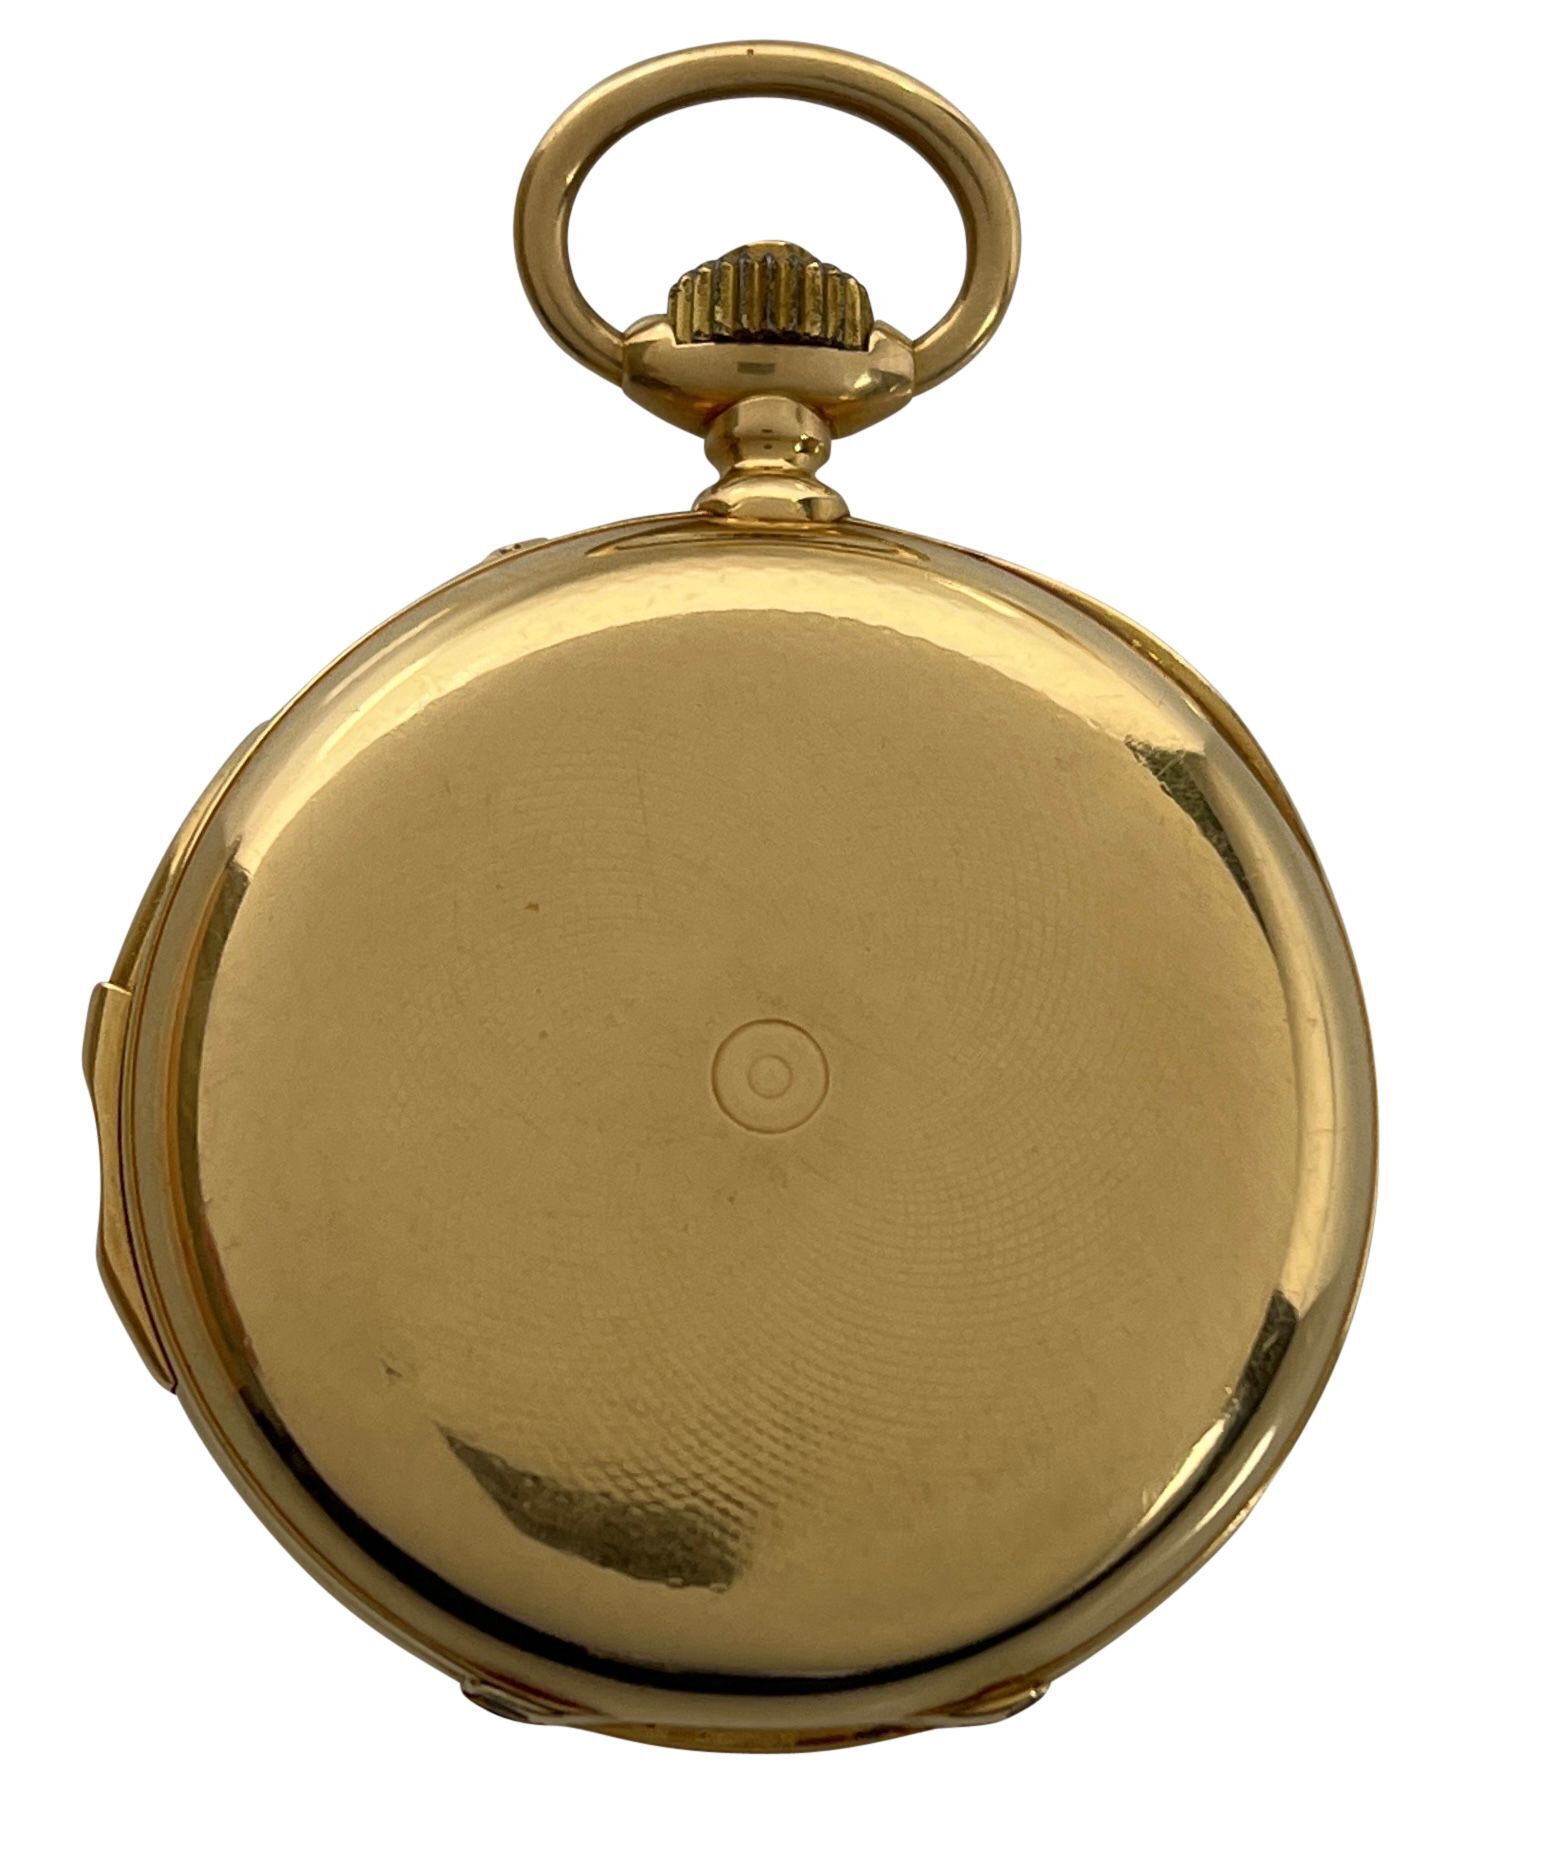 L. Audemars Russian Market Minute Repeater 18K Gold Hunting Case Pocket Watch - 6